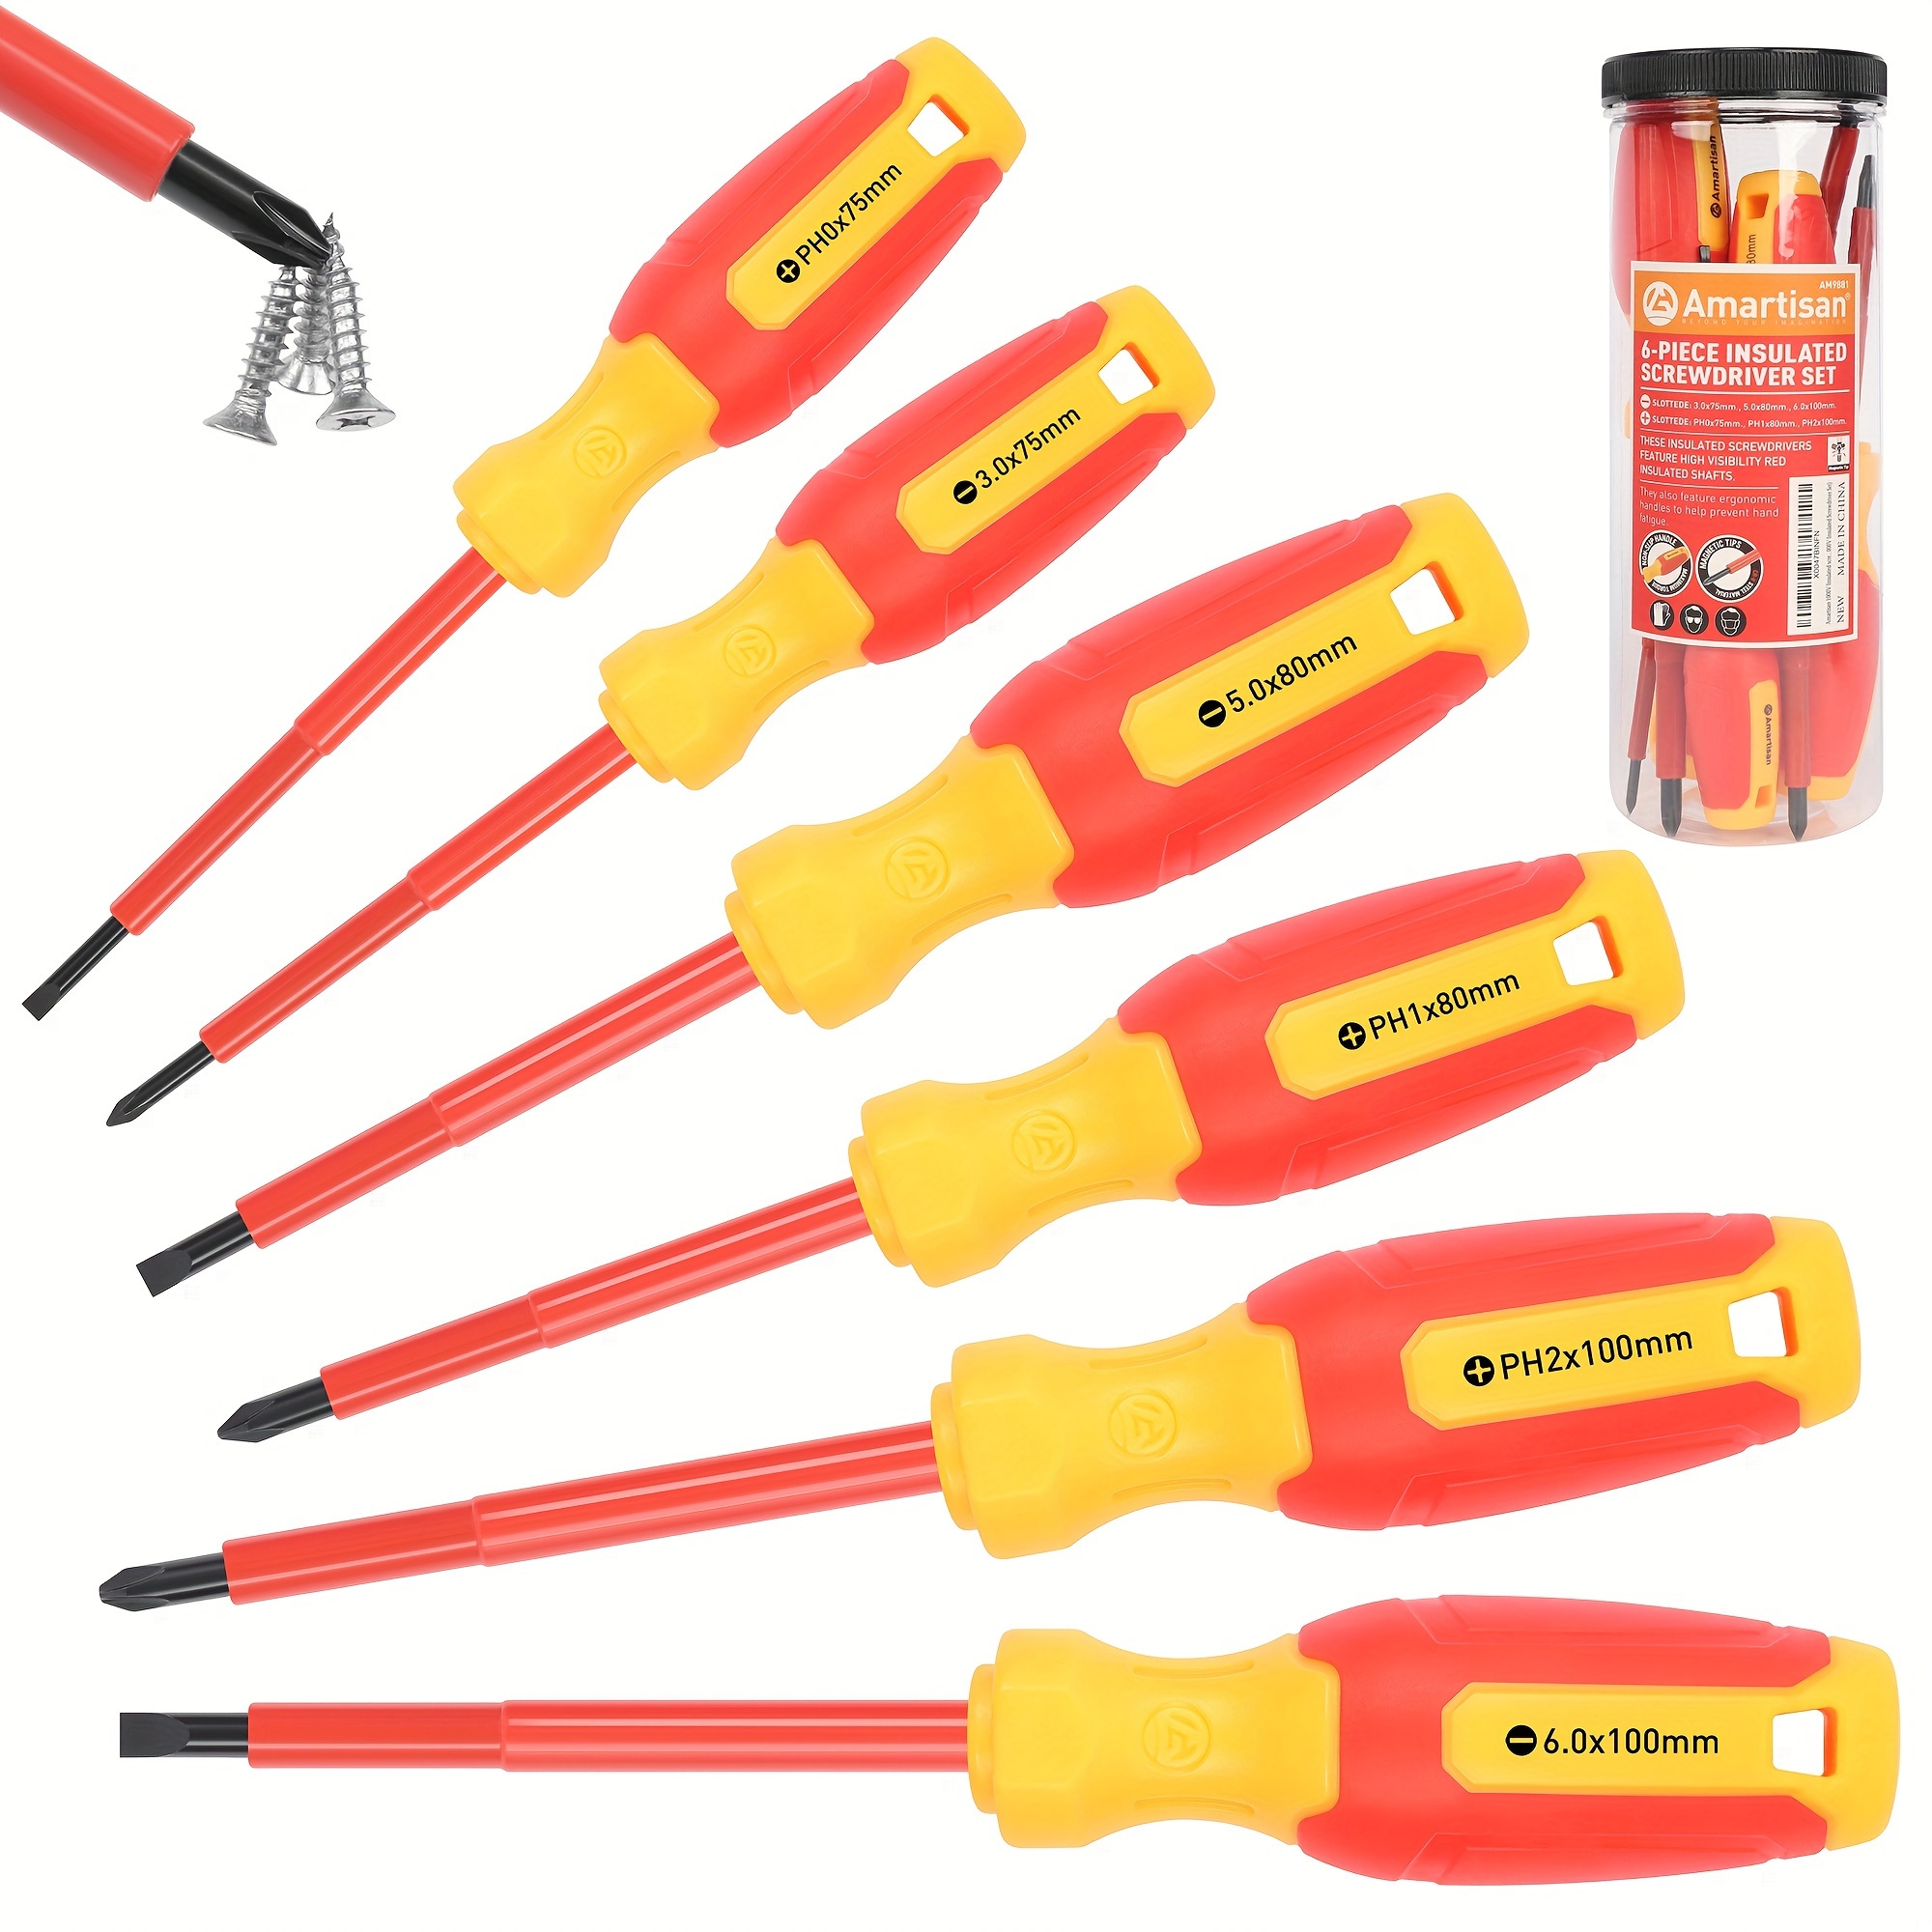 

professional Grade" Amartisan 6-piece Insulated Screwdriver Set With Magnetic Tips - Durable Cr-v Steel, Ergonomic Tpr Handle, Includes Phillips & Flathead For Electricians